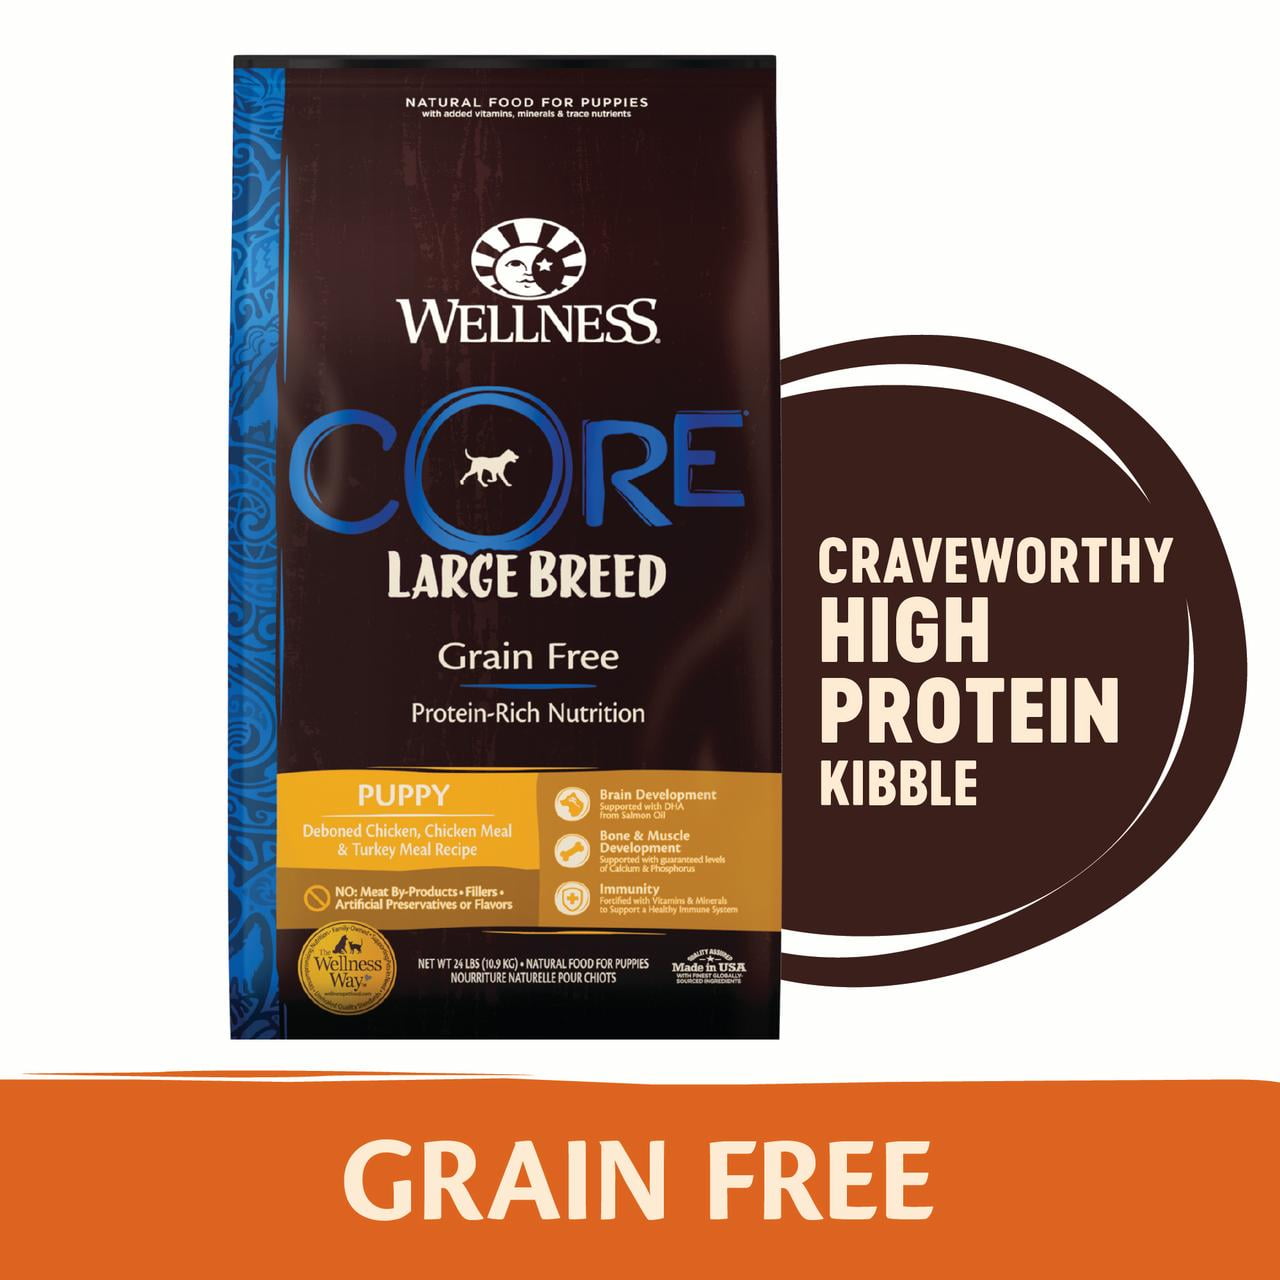 Wellness CORE Natural Grain Free Dry Puppy Food, Large Breed Puppy, 12